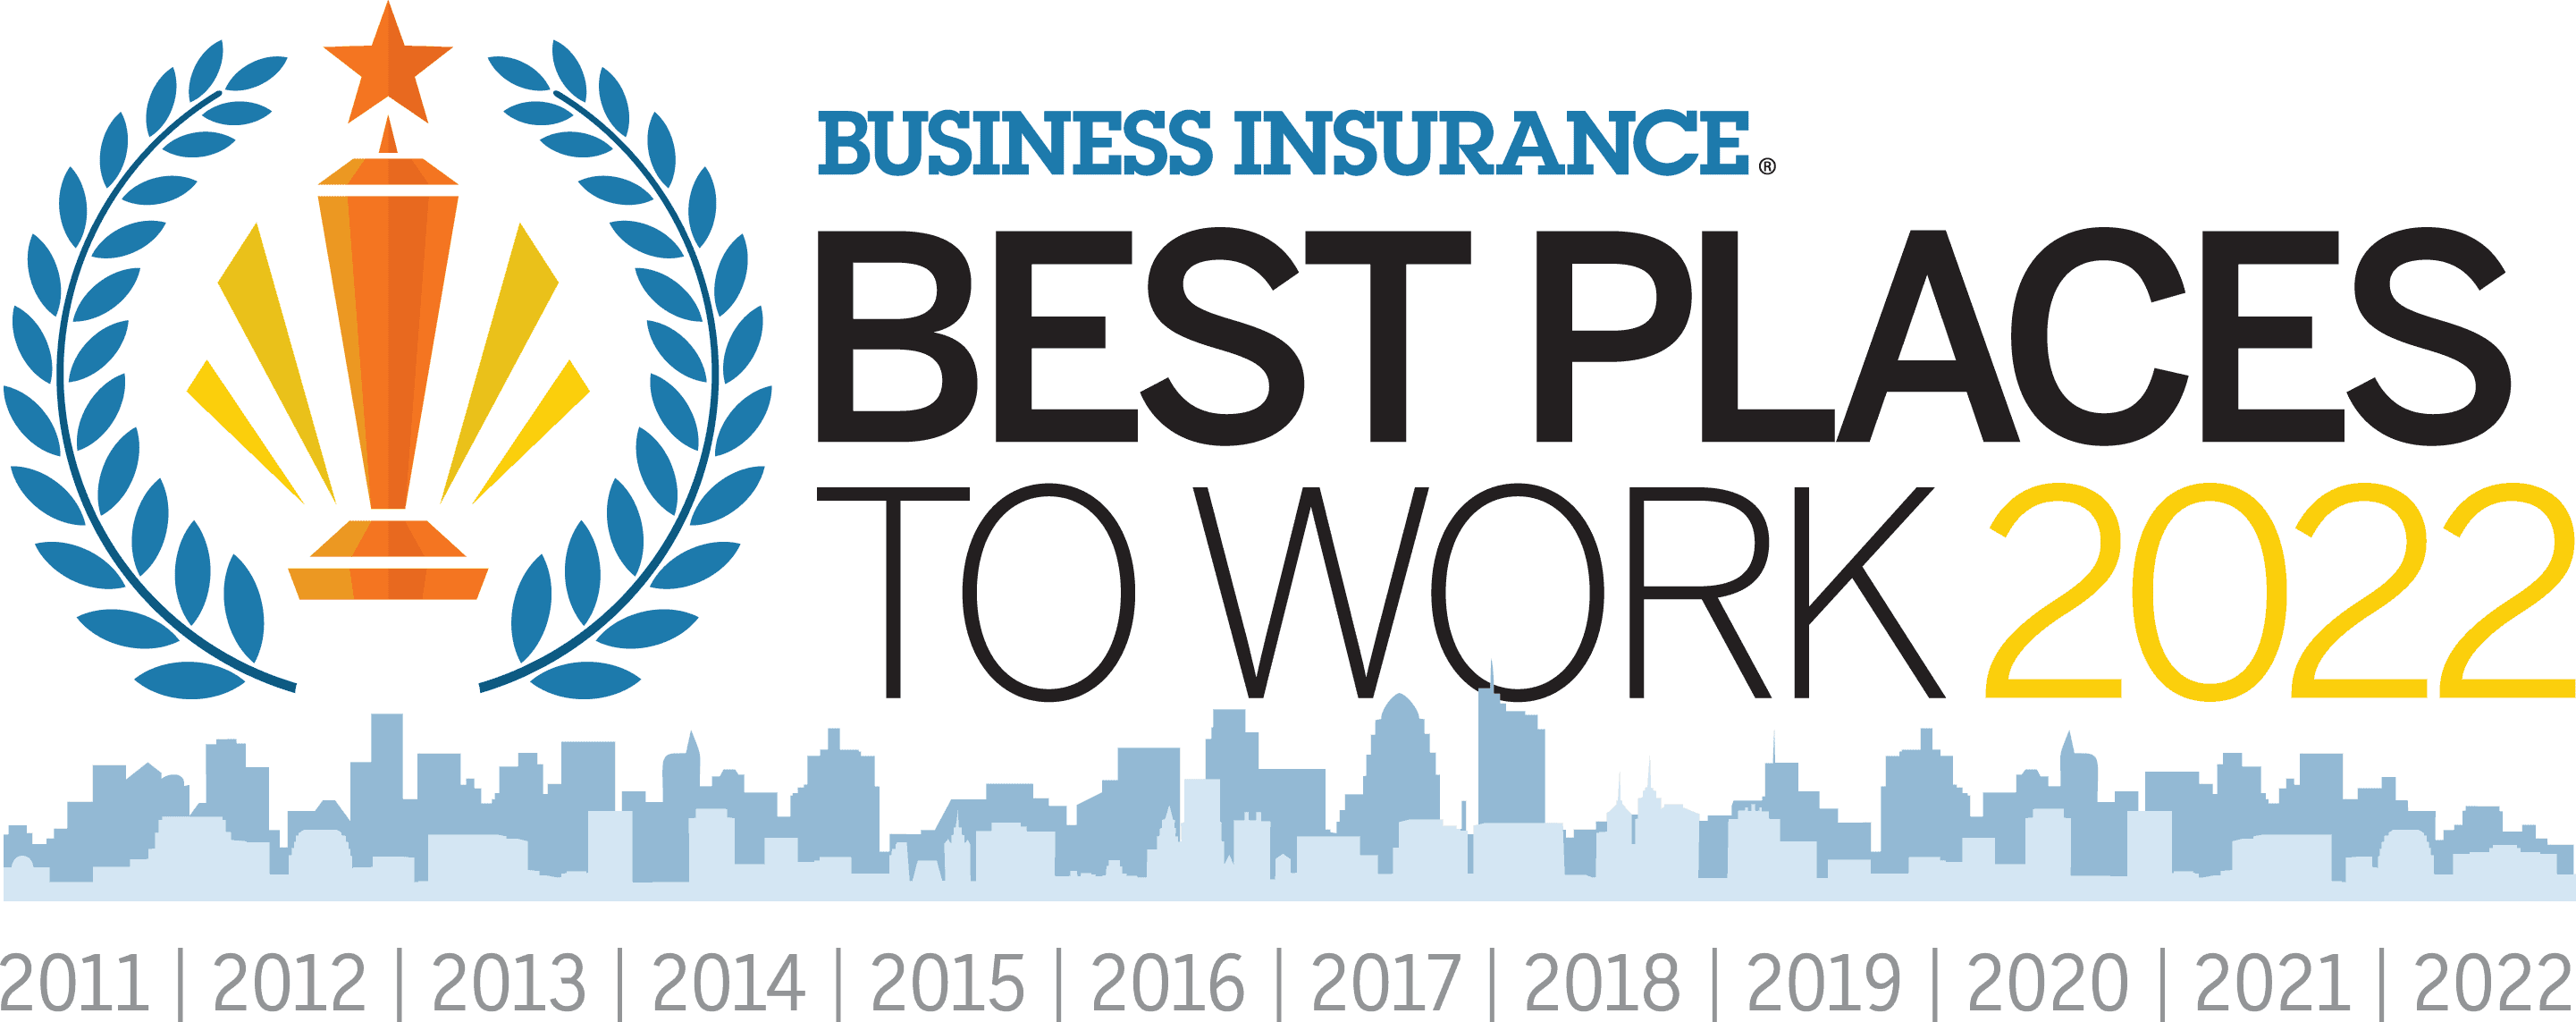 best places to work in insurance